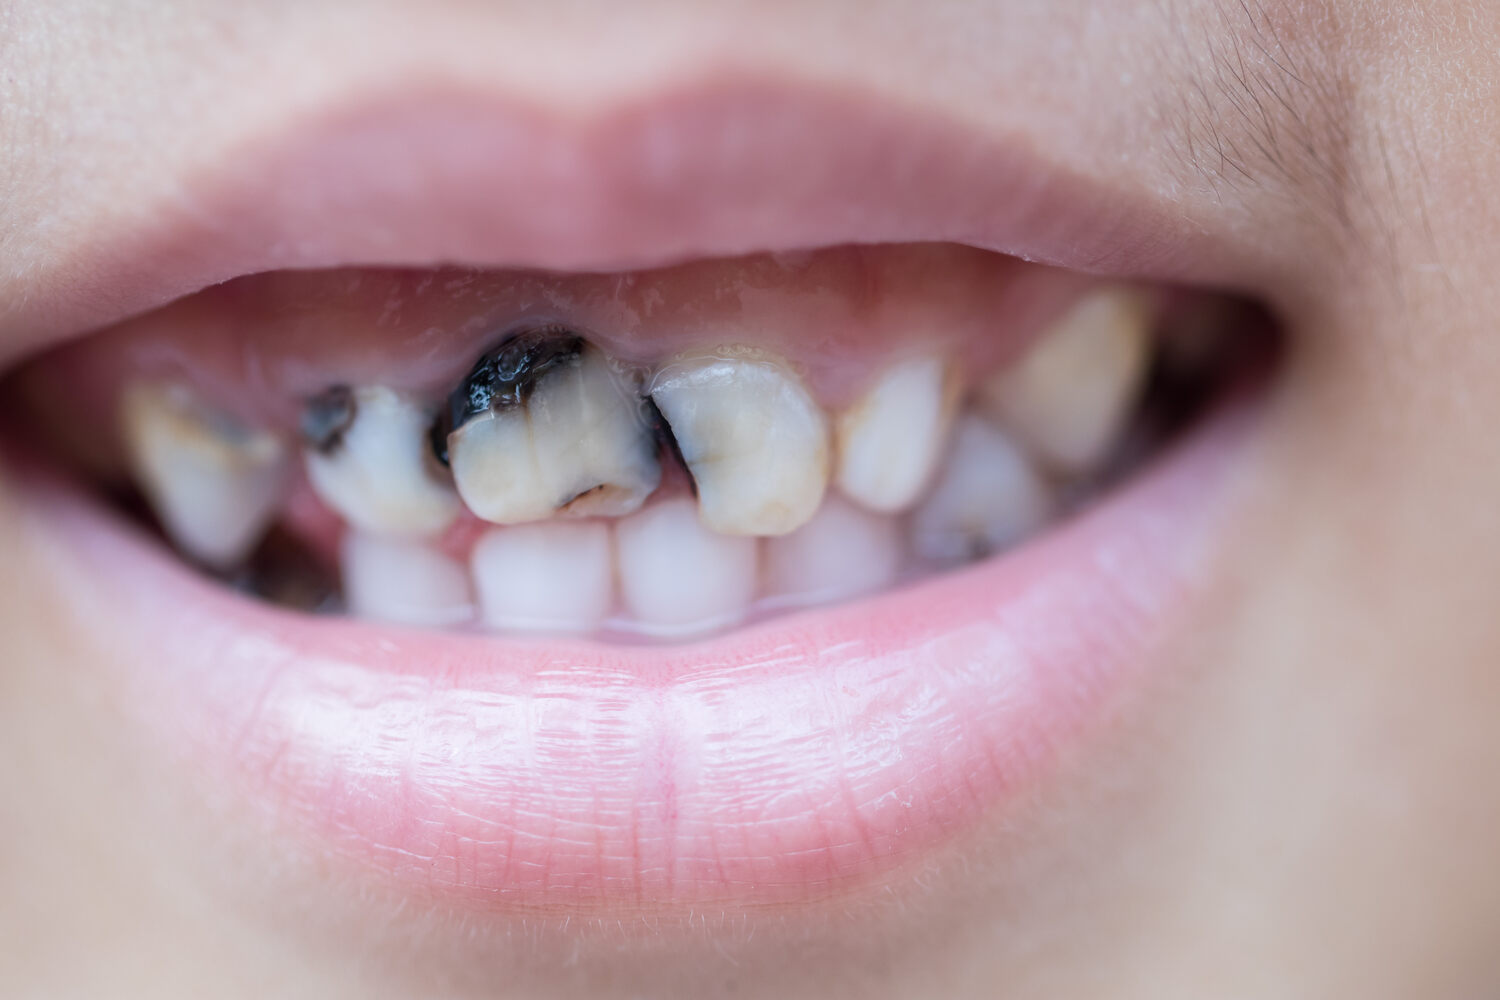 Children with poor oral hygiene are at risk of tooth decay